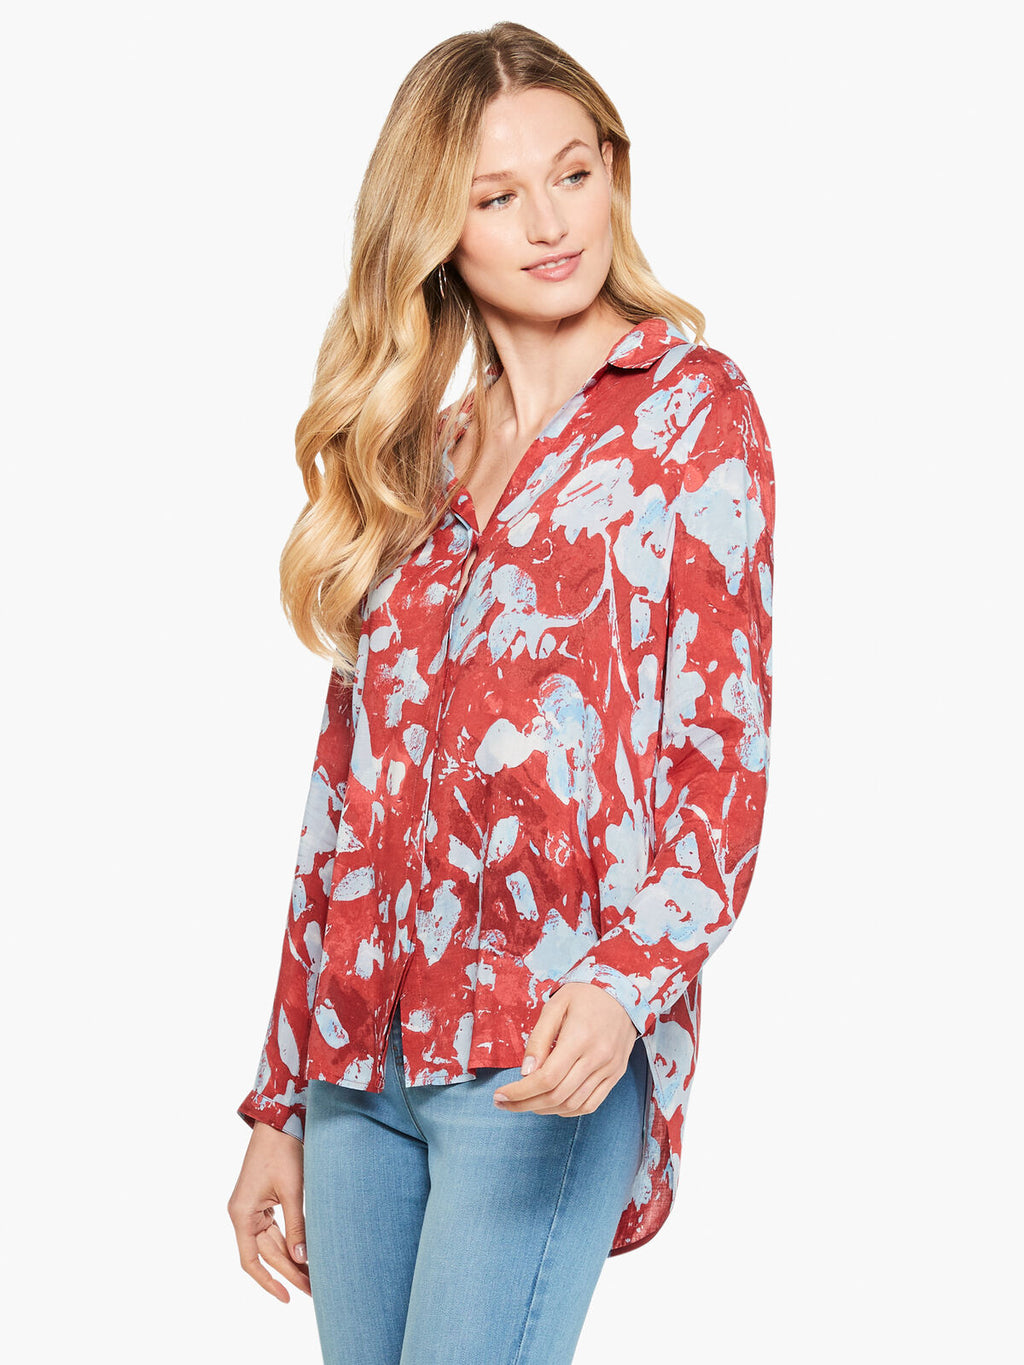 Front top half view of a woman wearing the terracotta blooms shirt from nic and zoe. This shirt has a relaxed fit with long sleeves and a button down front. The shirt is red with a light blue floral print.